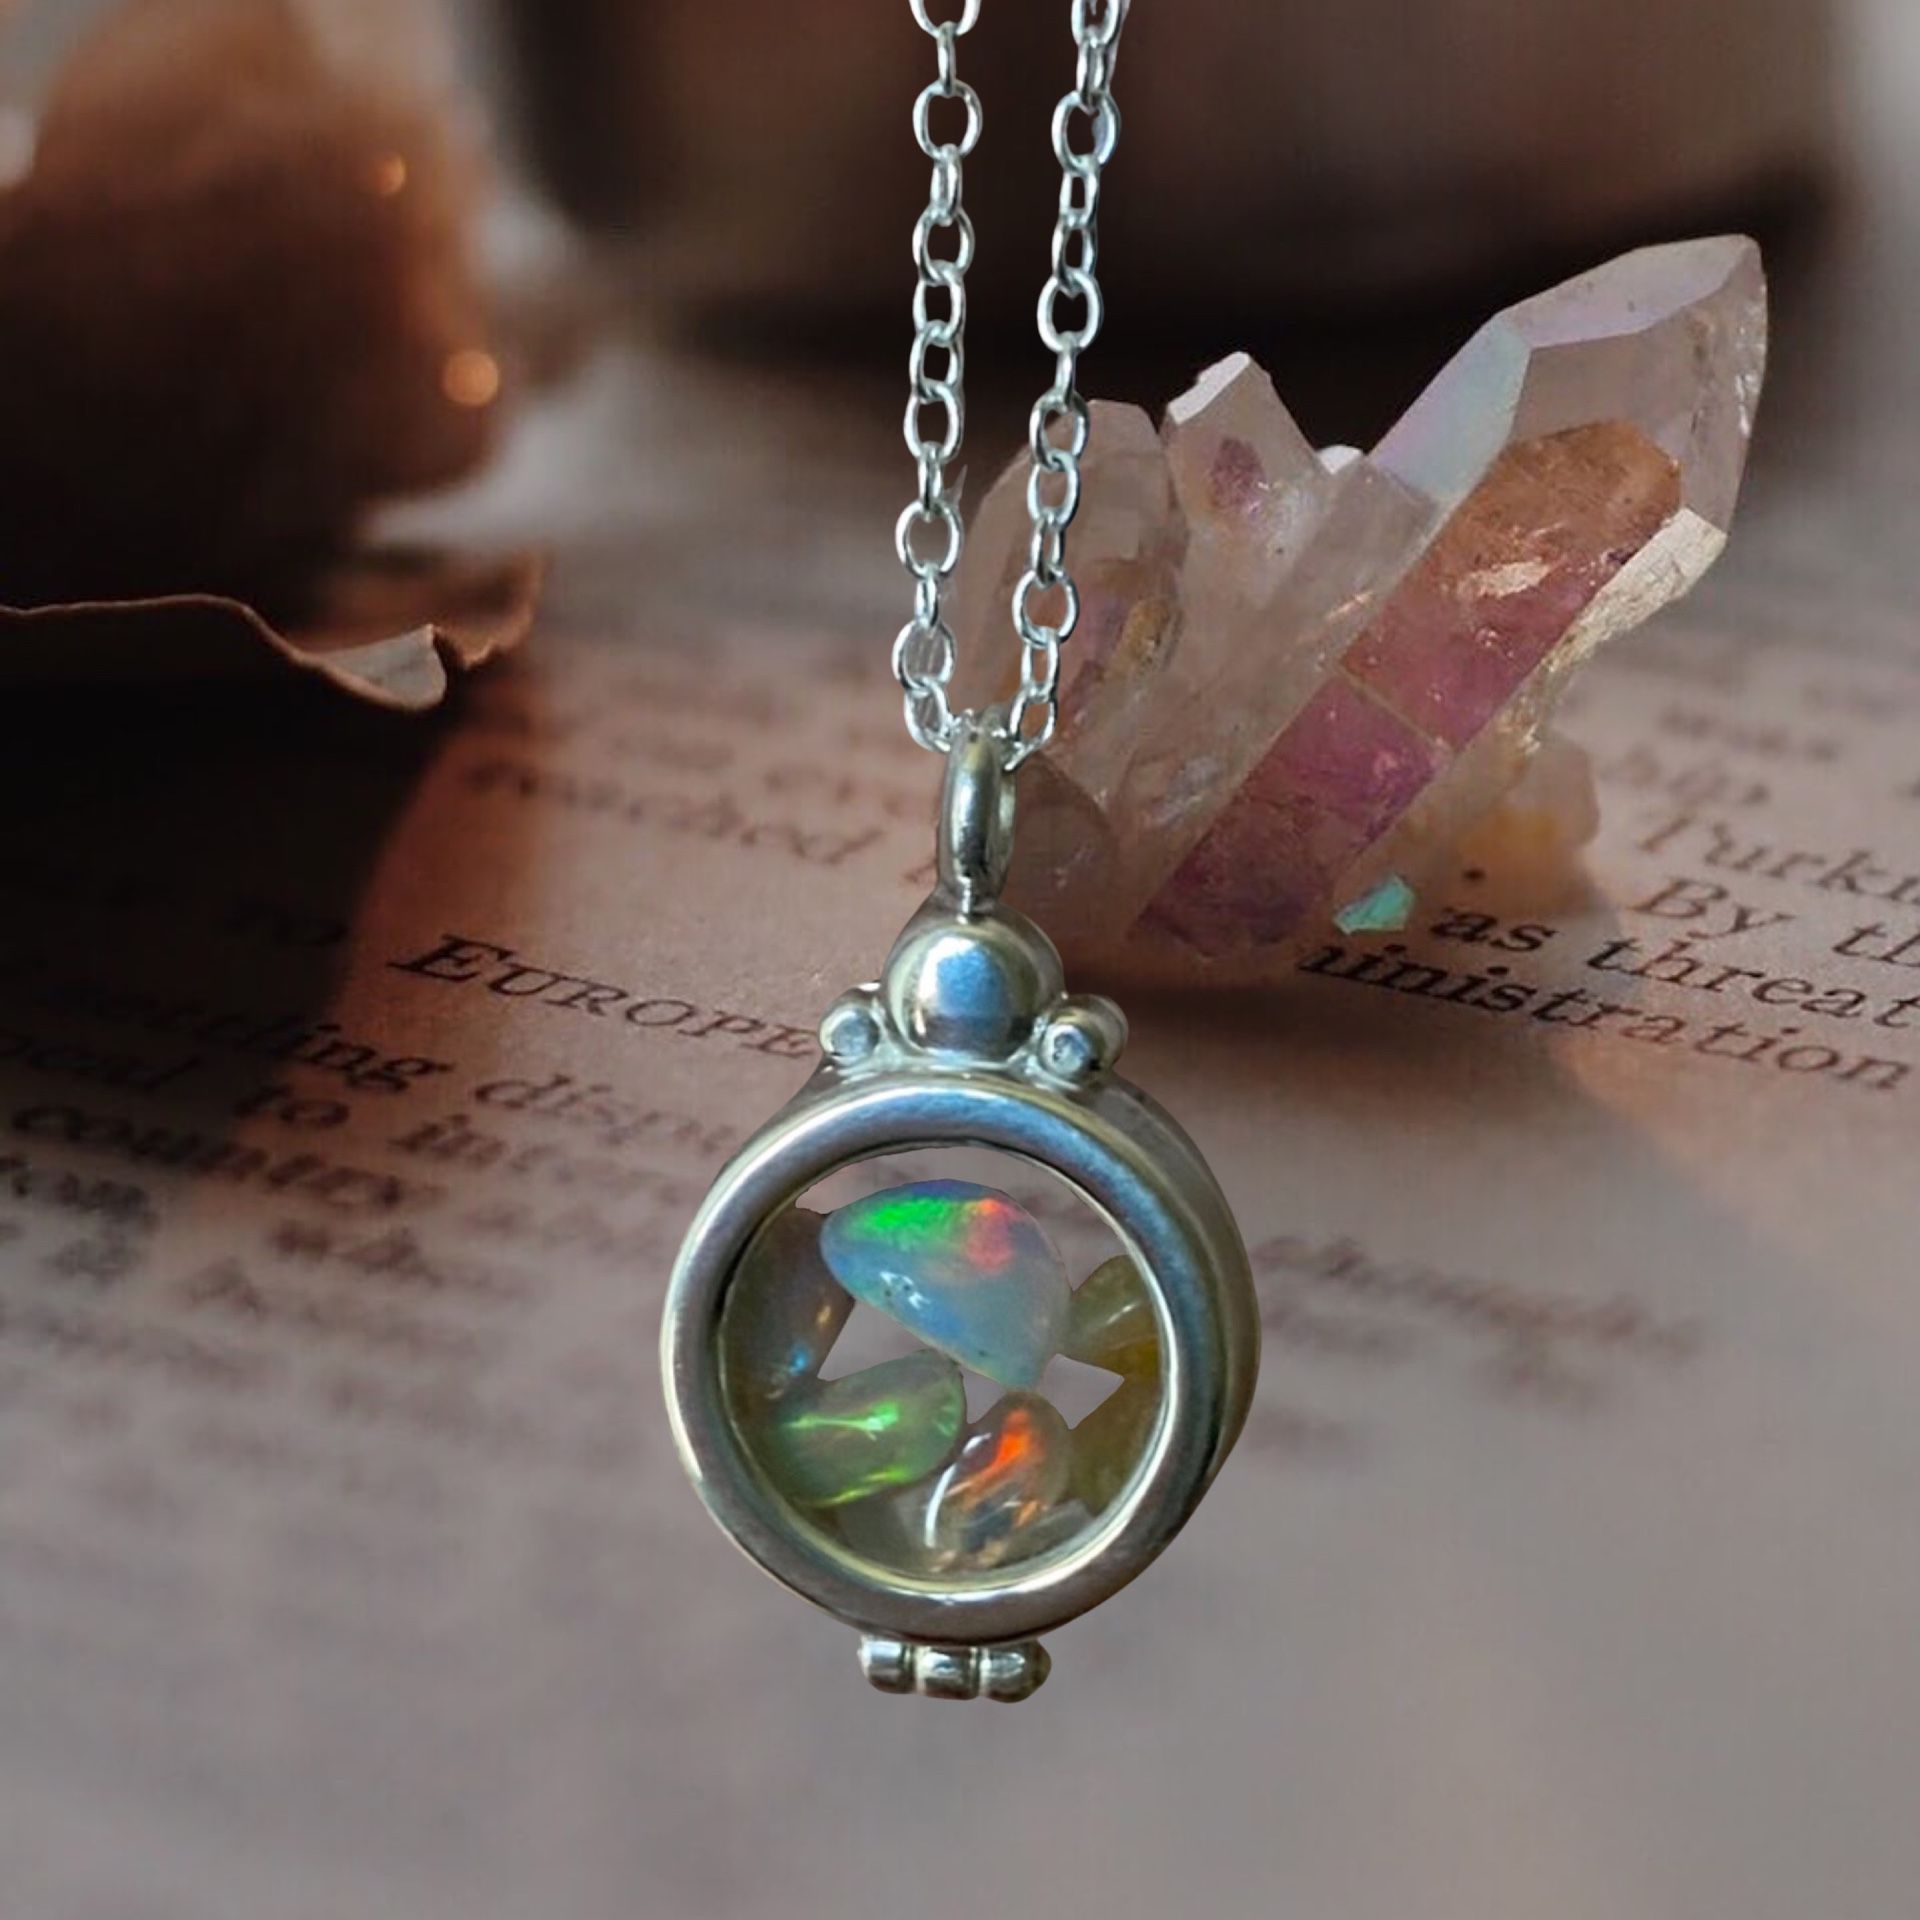 Genuine High Quality Opals Inside Solid 925 Sterling Silver Glass Locket. 